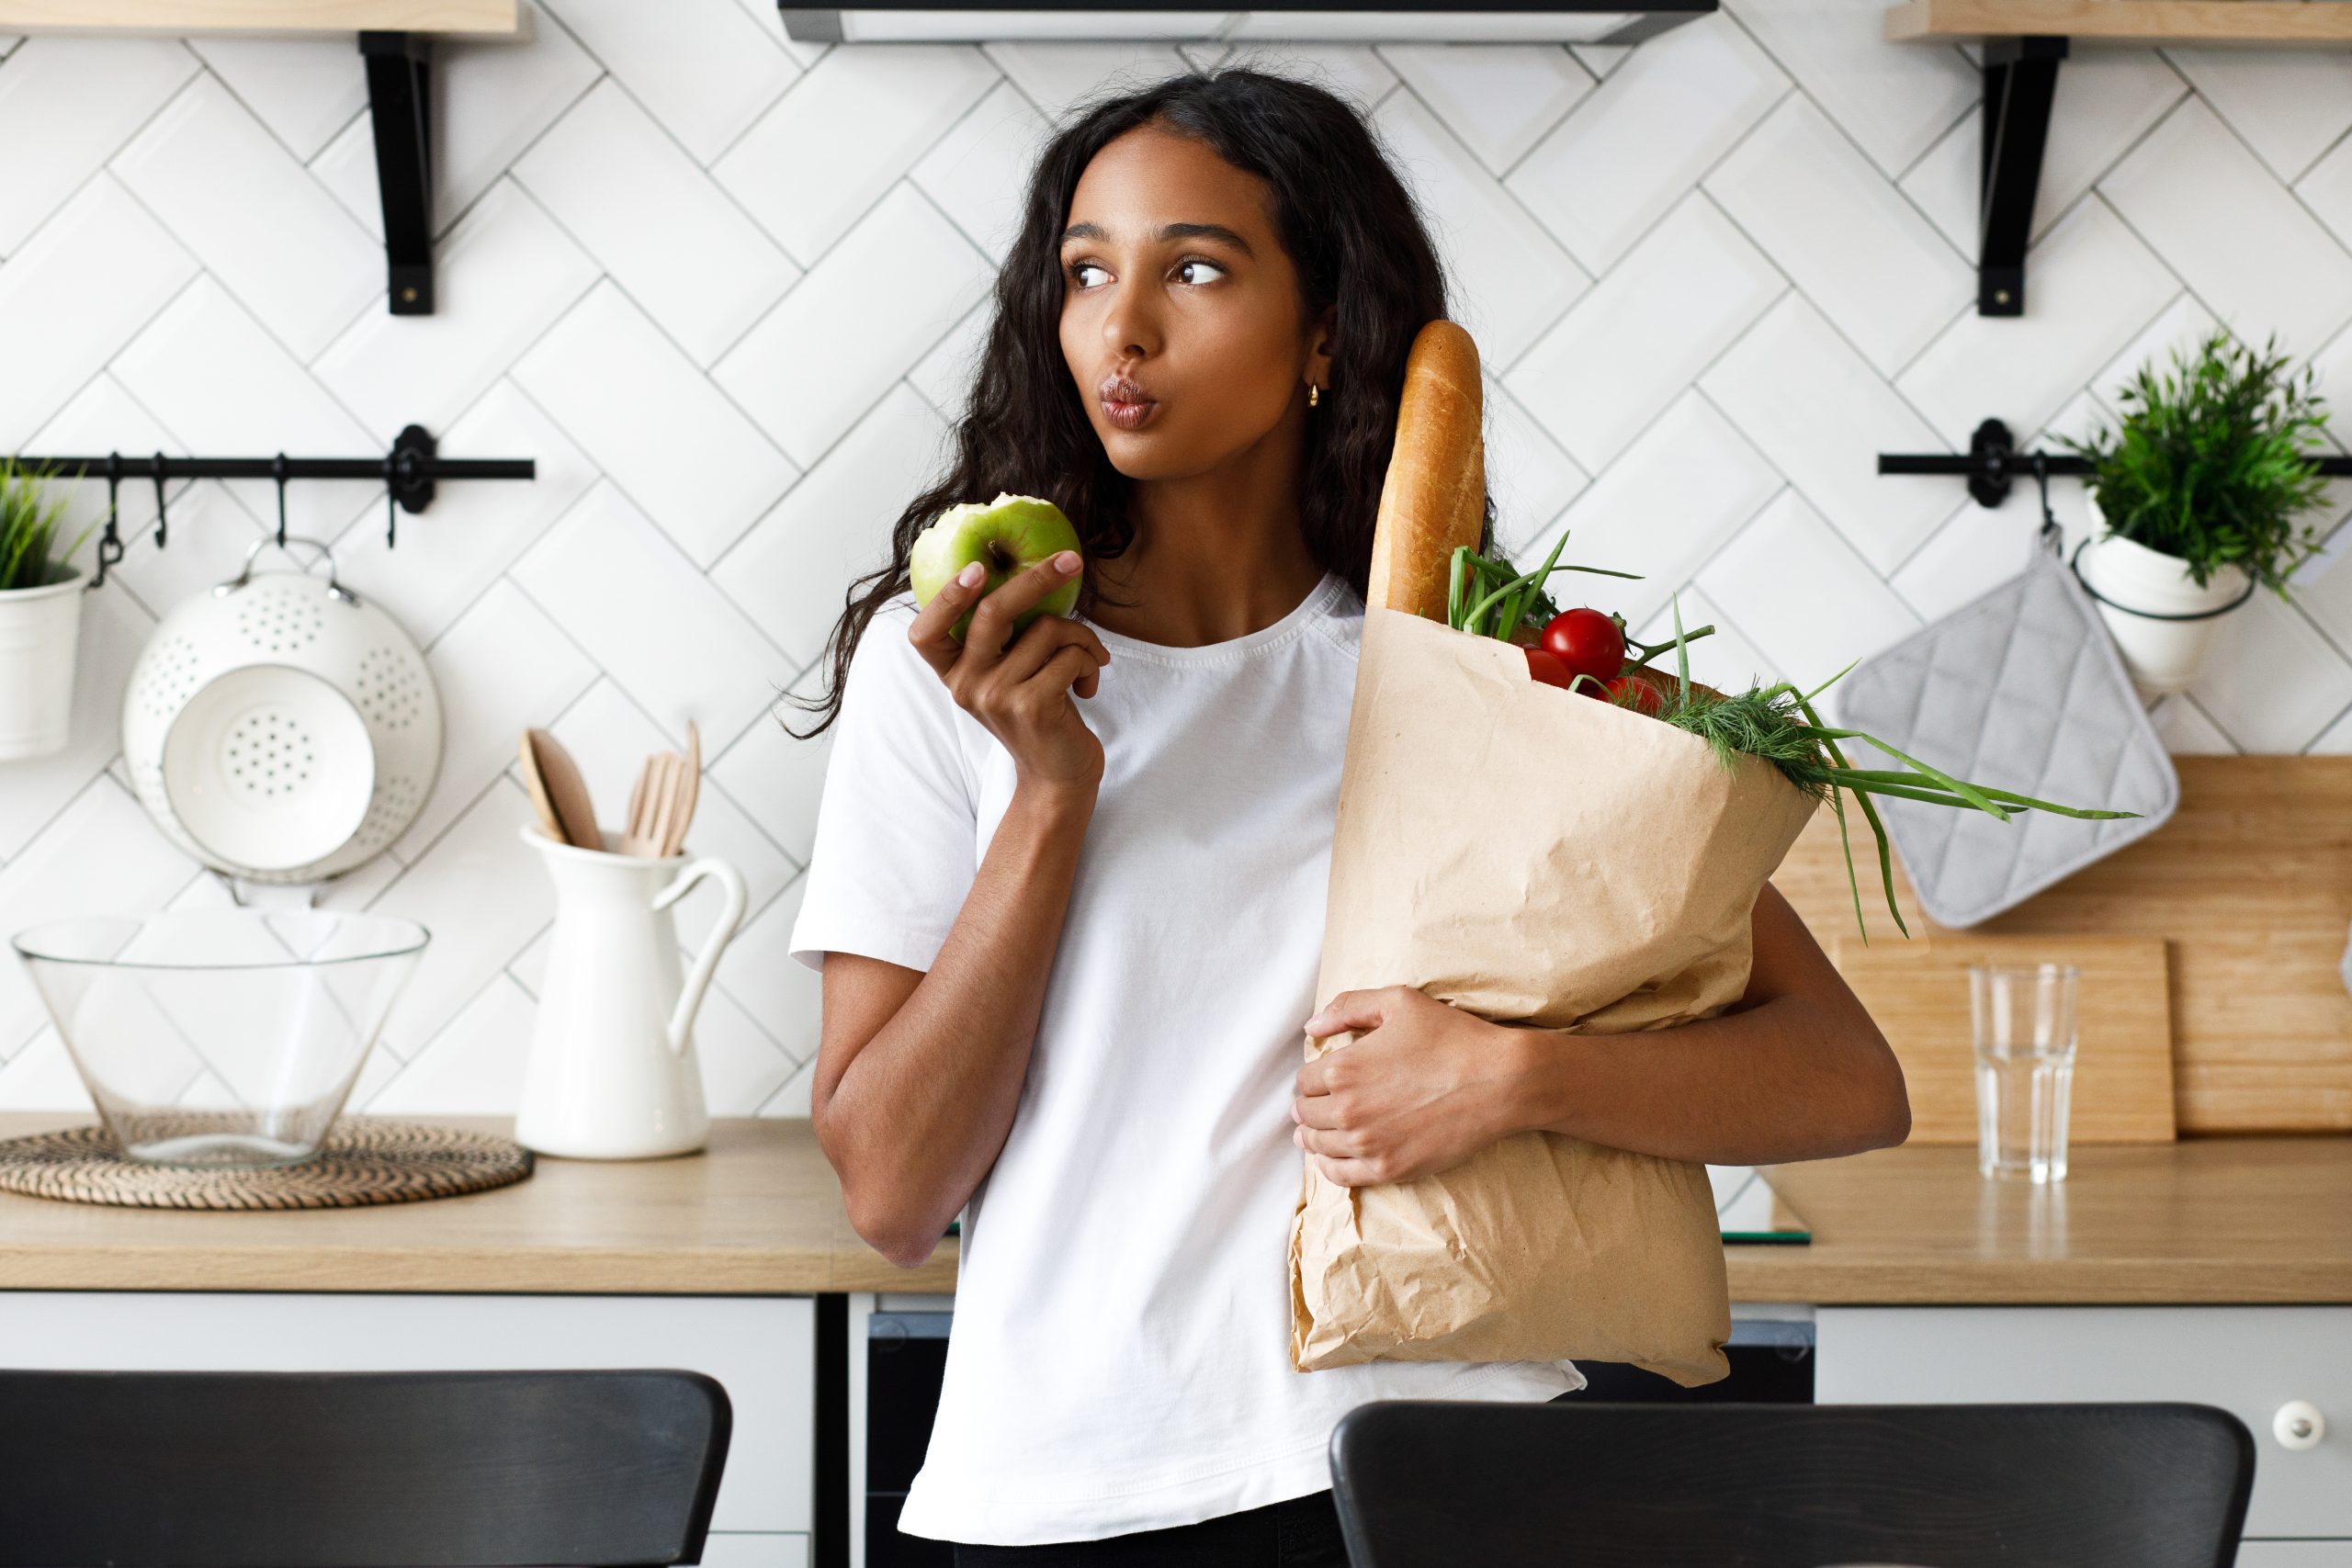 Thoughtful mulatto girl is holding package full with fresh vegetables in one hand and bitten apple in other, on the modern white kitchen